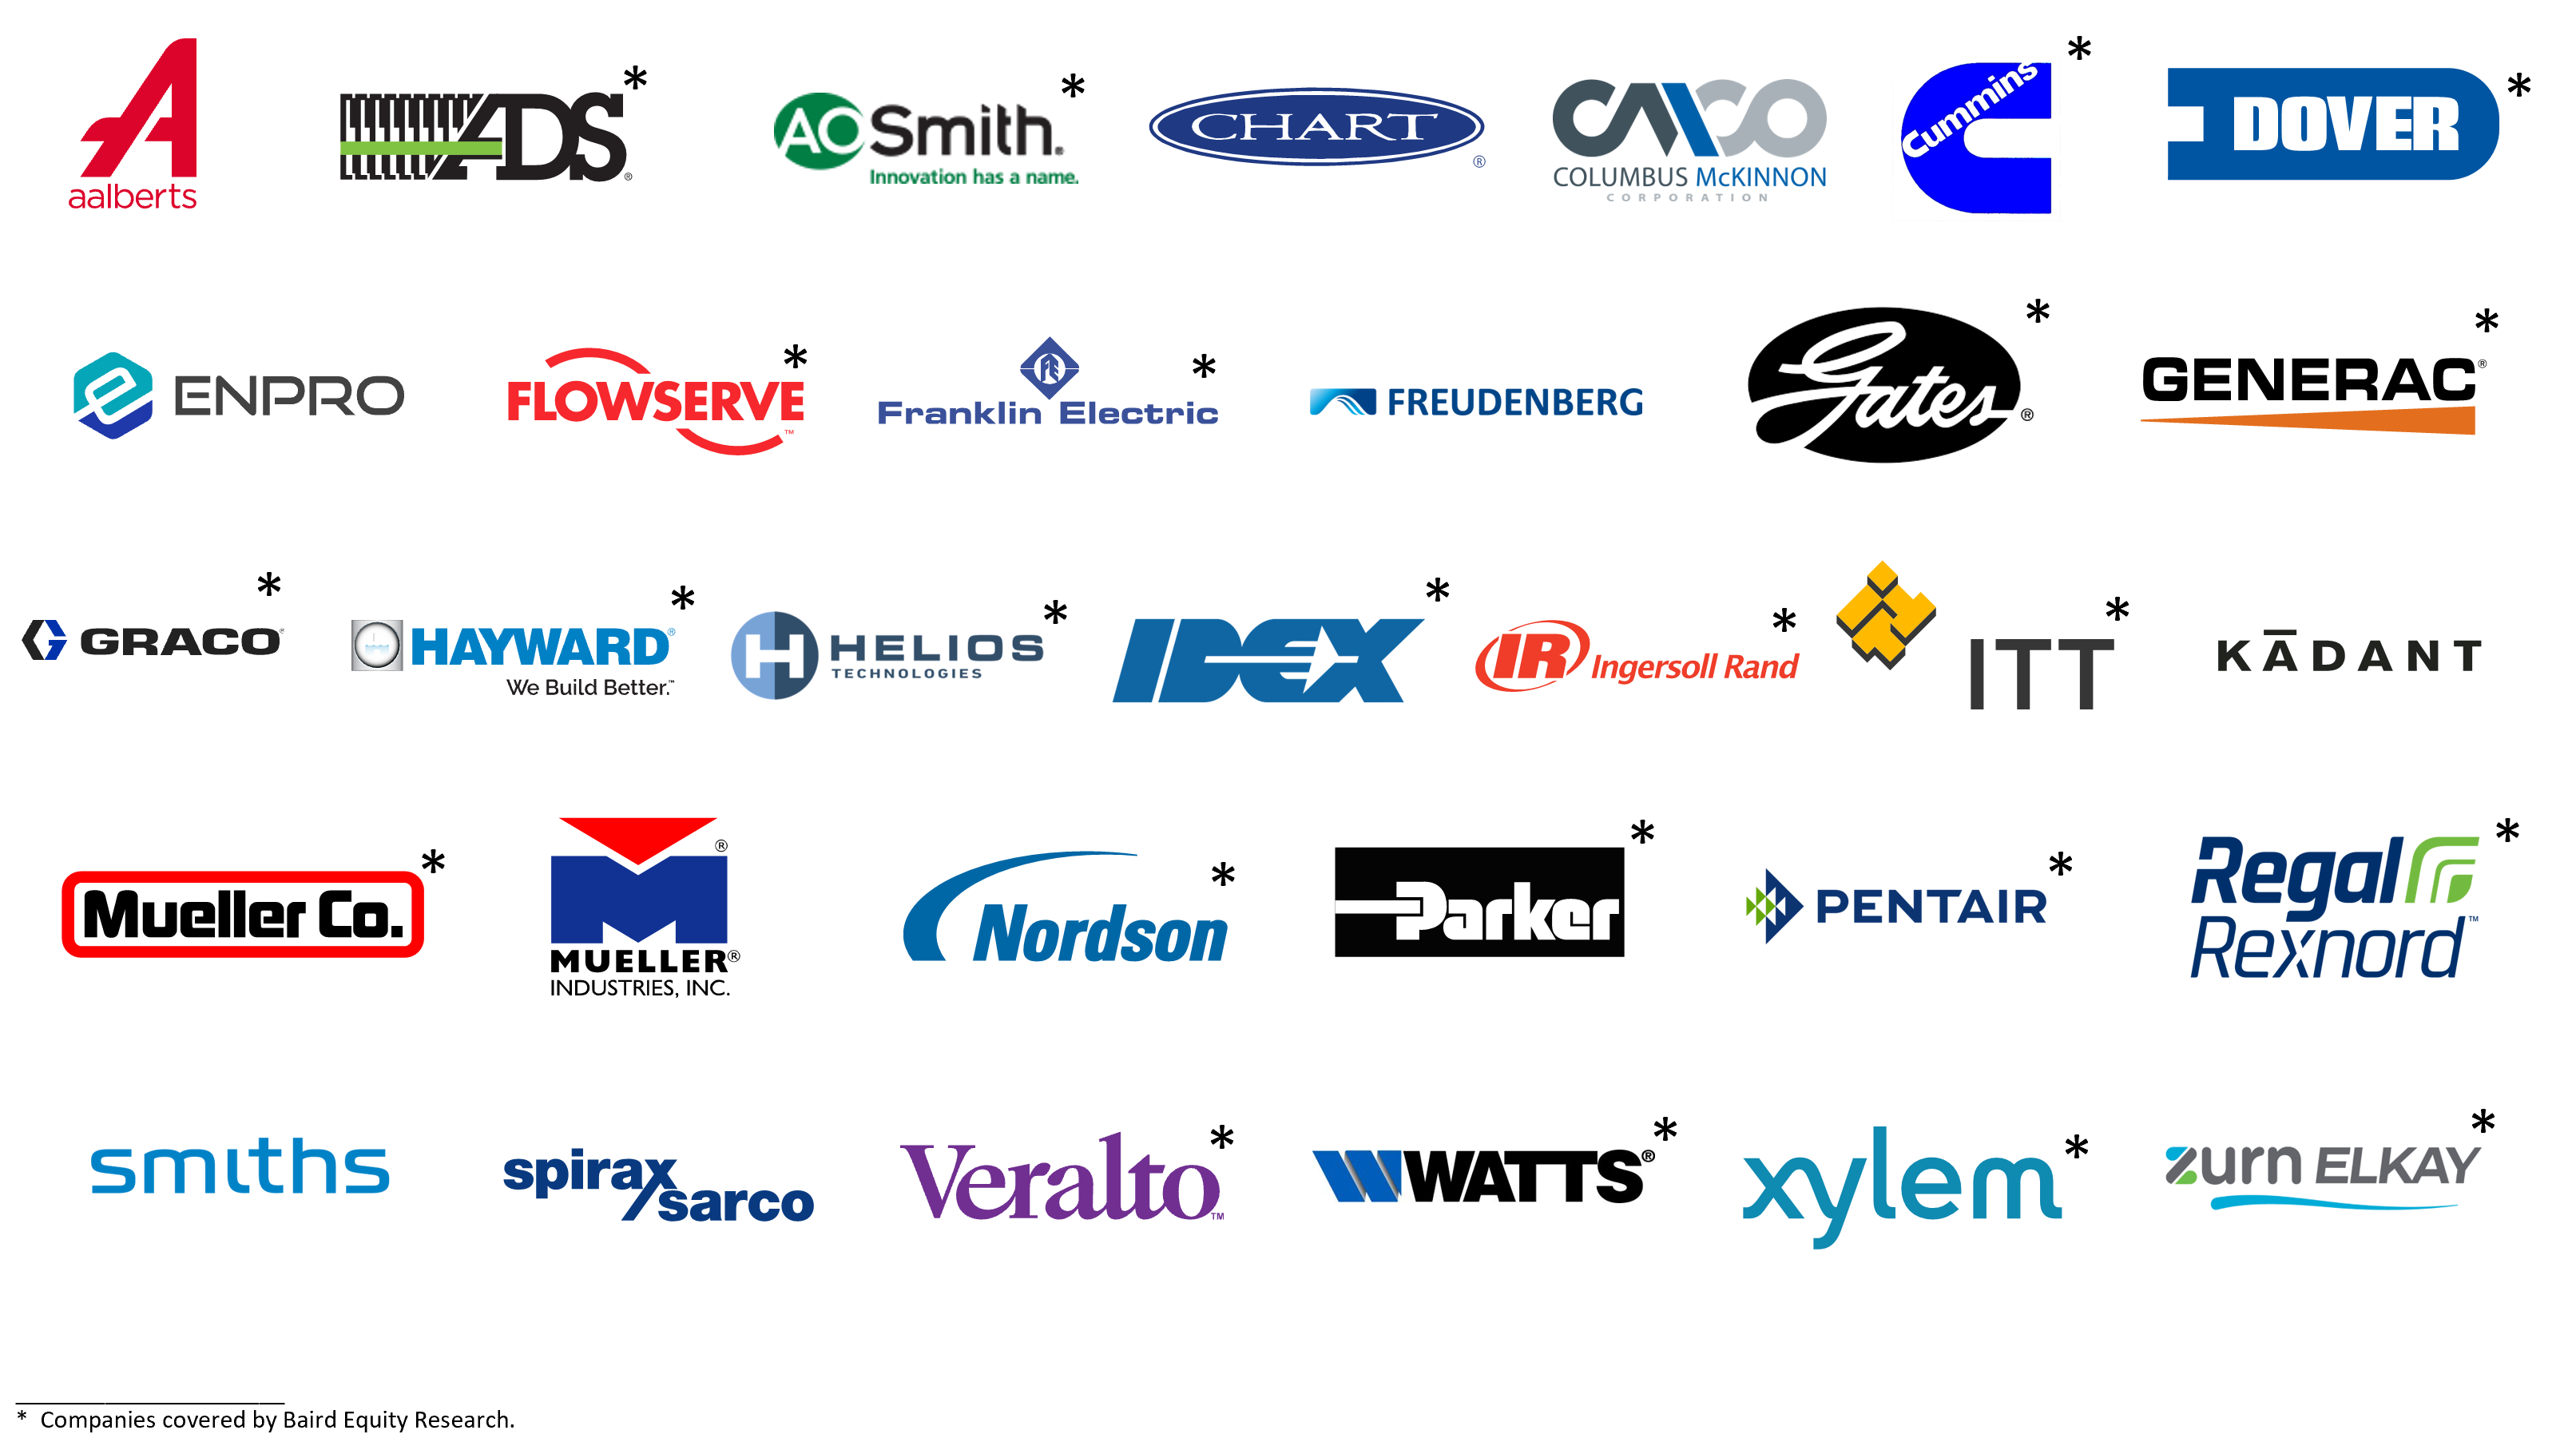 Company logos for those in attendance at the Flow, Motion and Power Technologies event